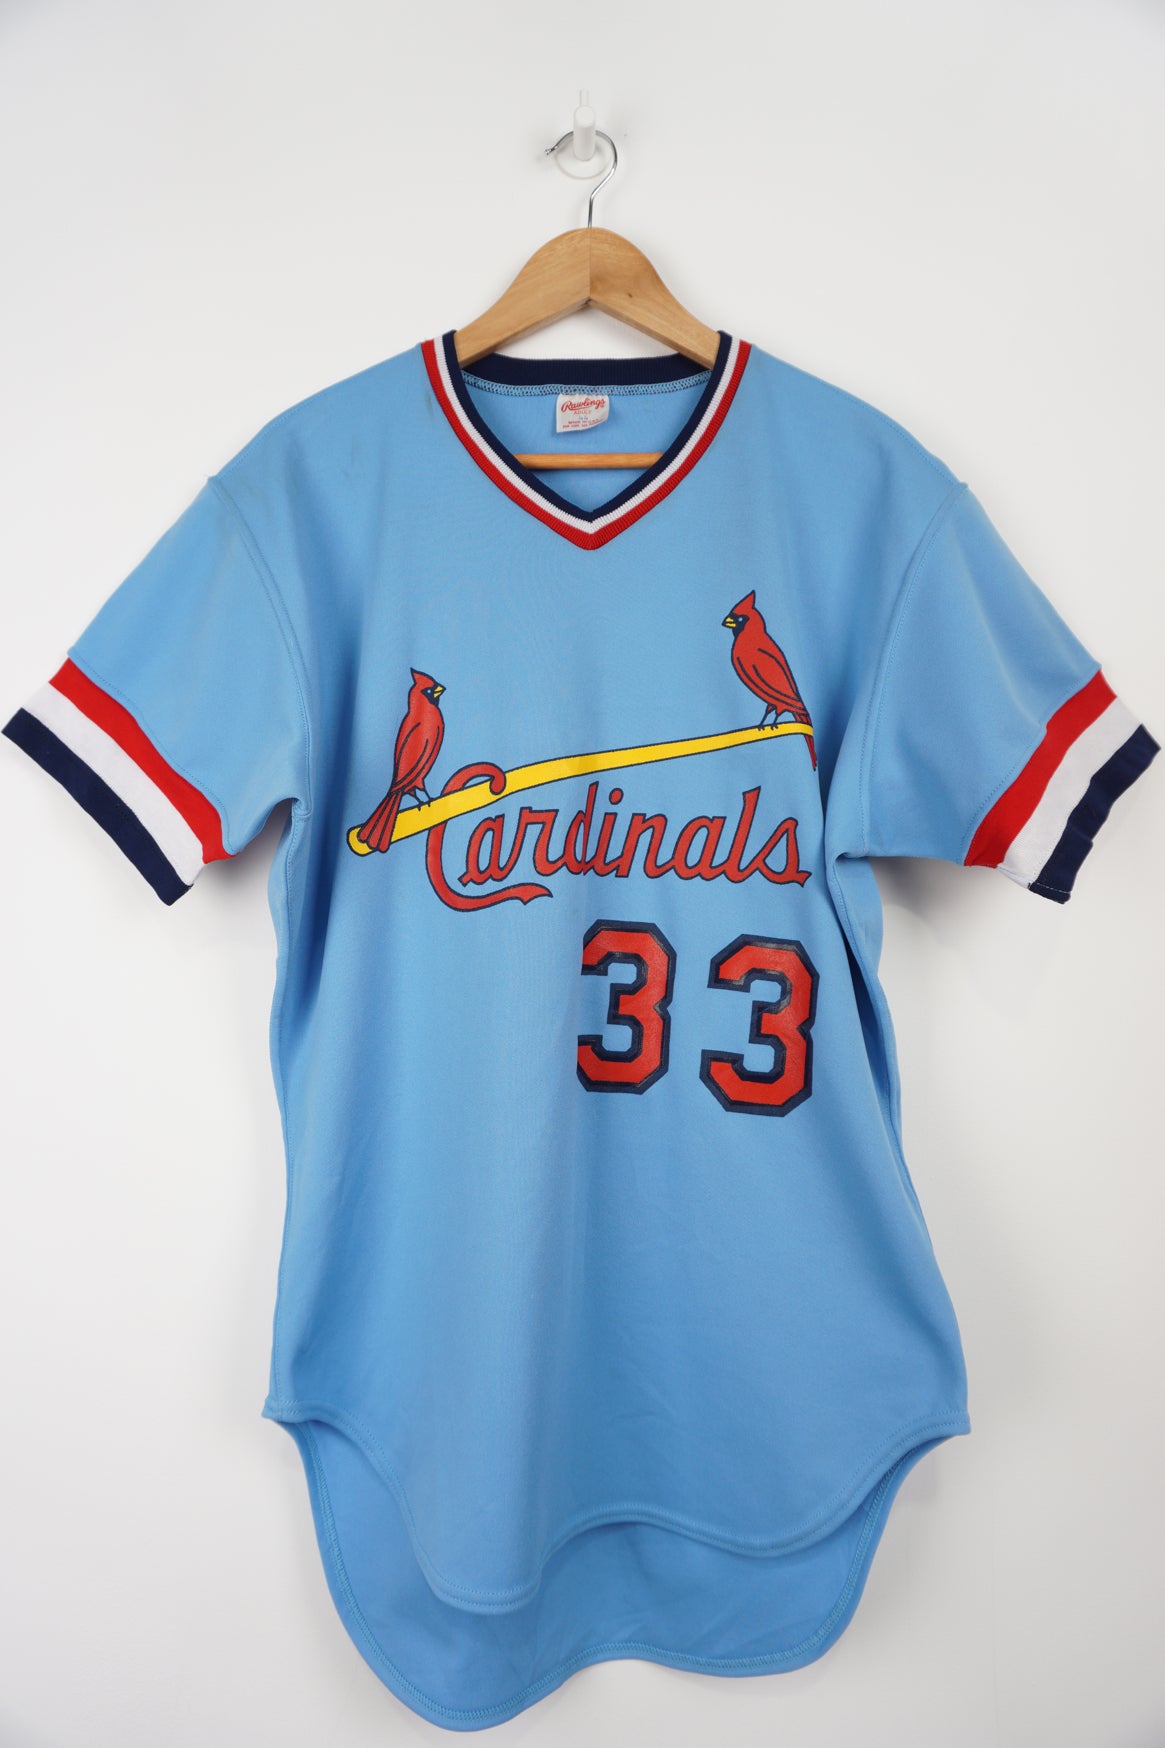 Vintage MLB St Louis Cardinals Embroidered T-shirt Made in USA